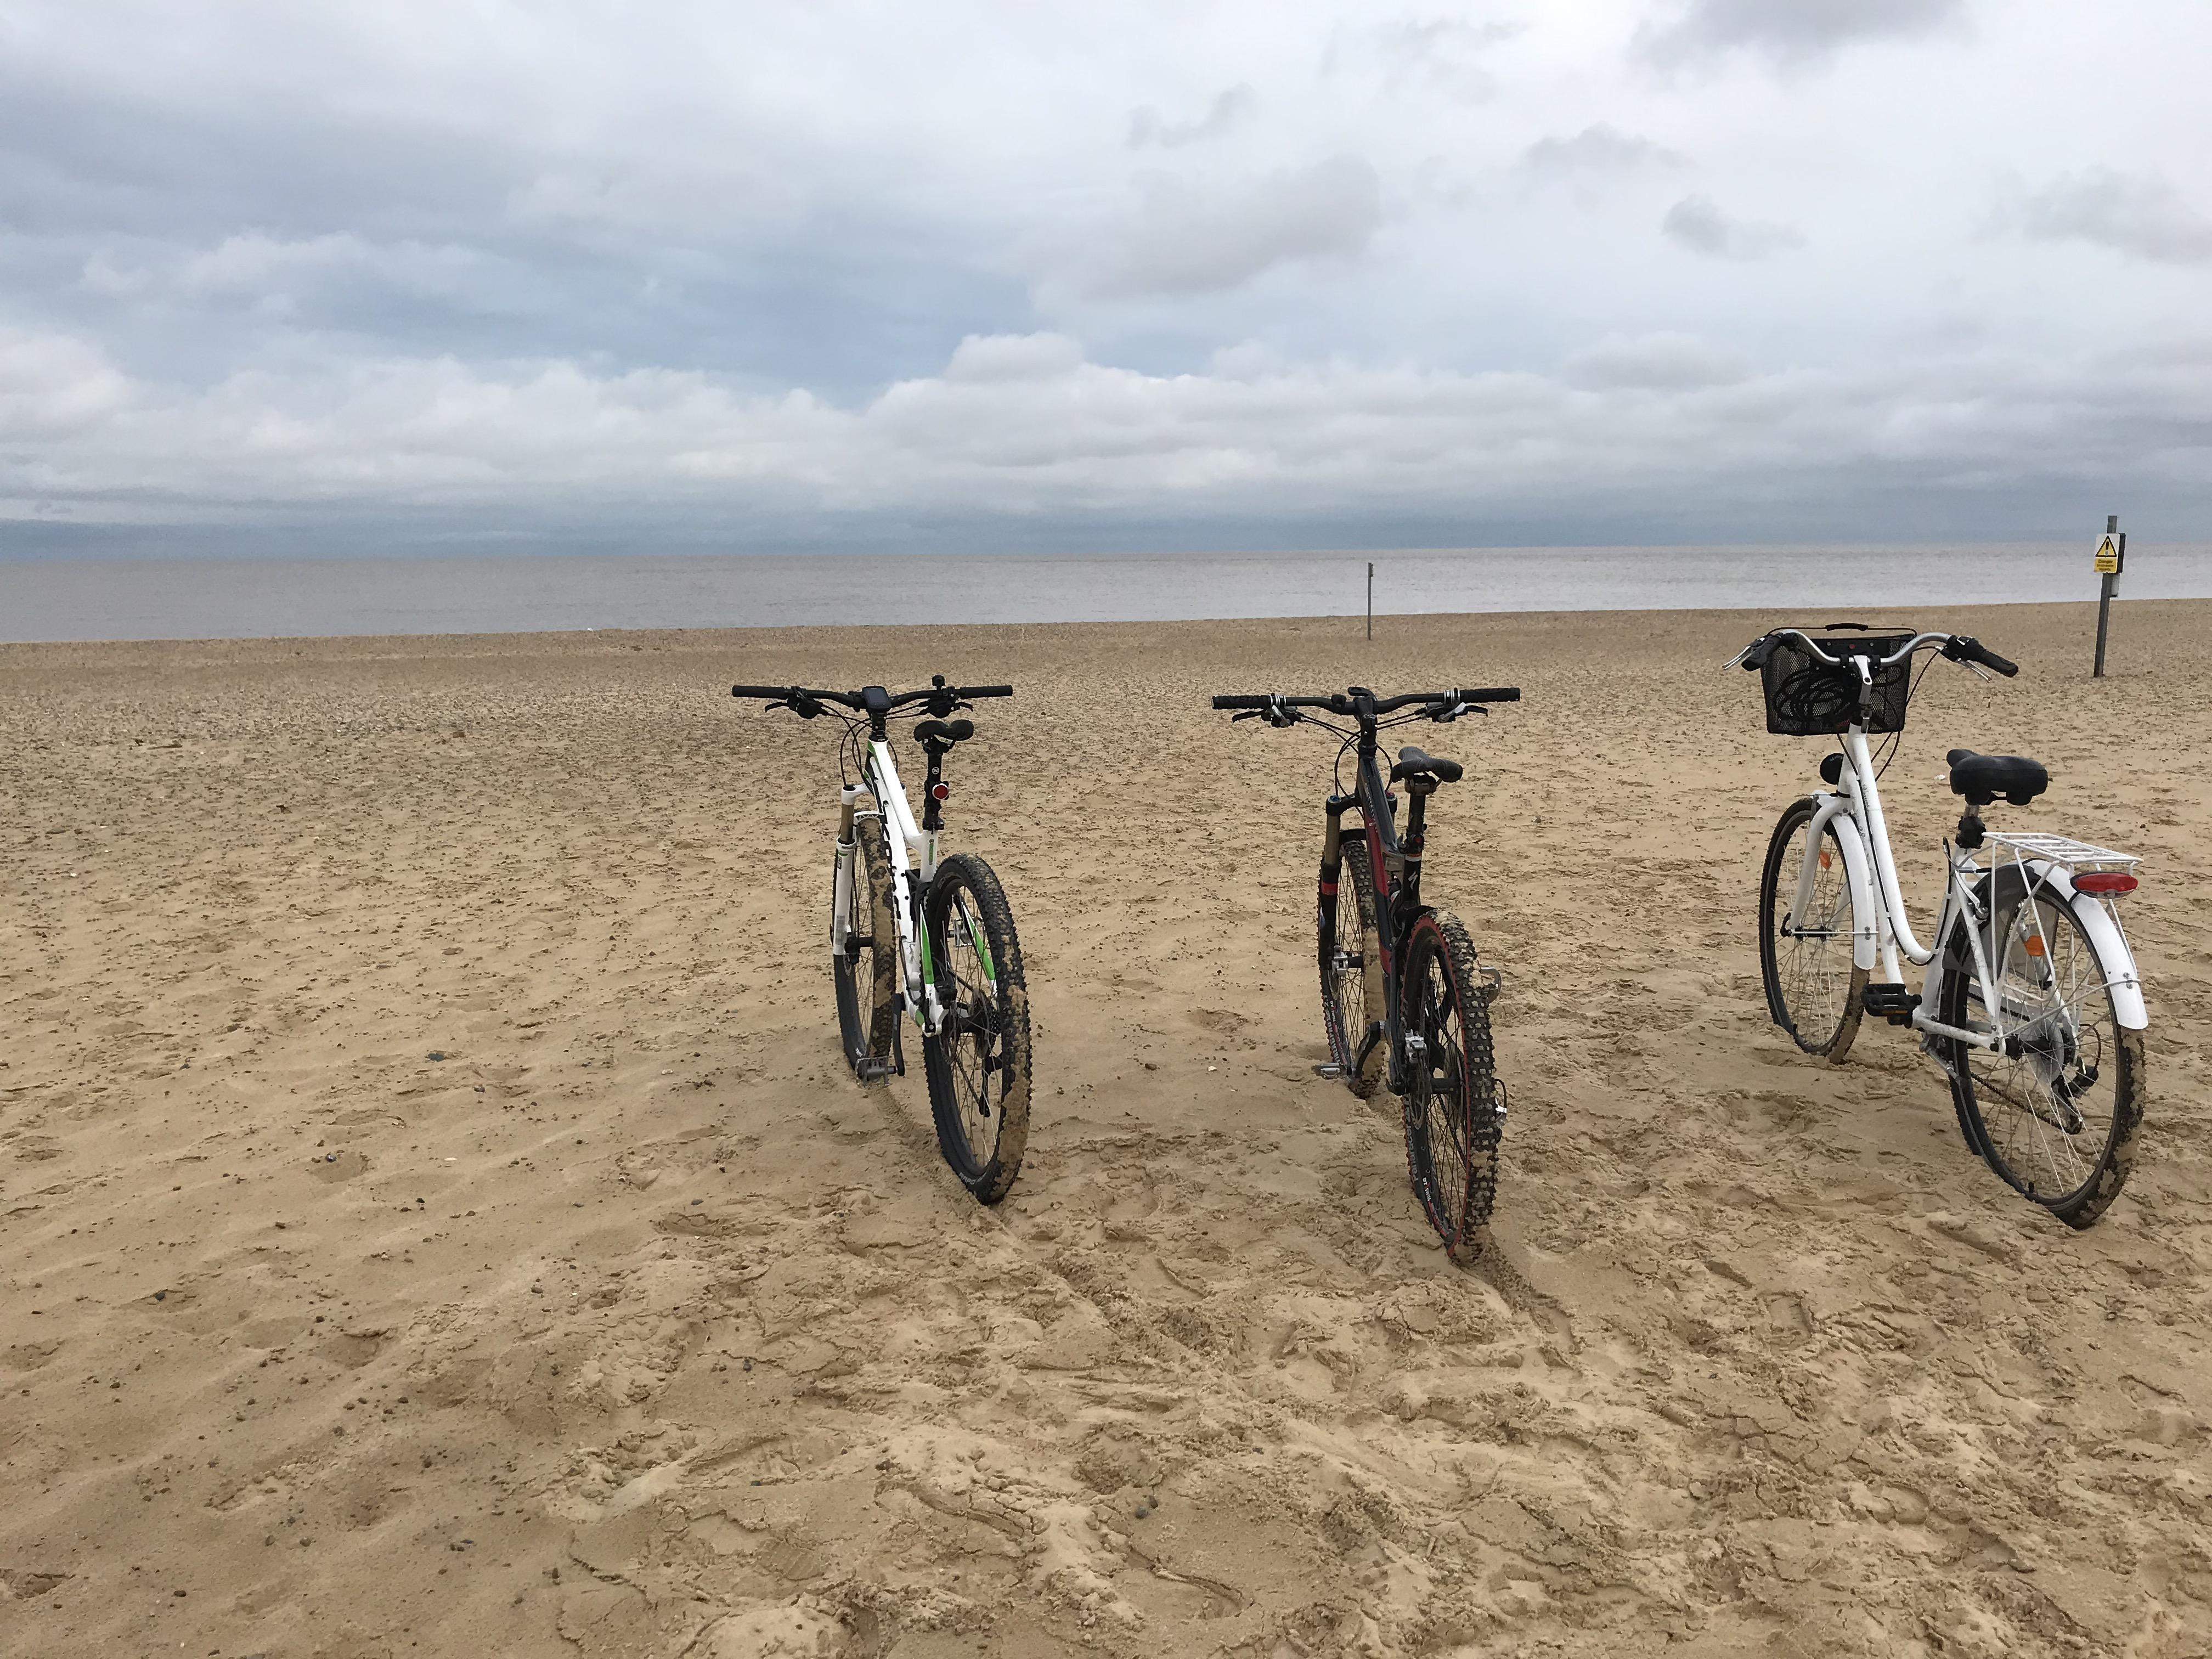 The beach was deserted on this freezing day, but the sand remained soft enough to stand the bikes